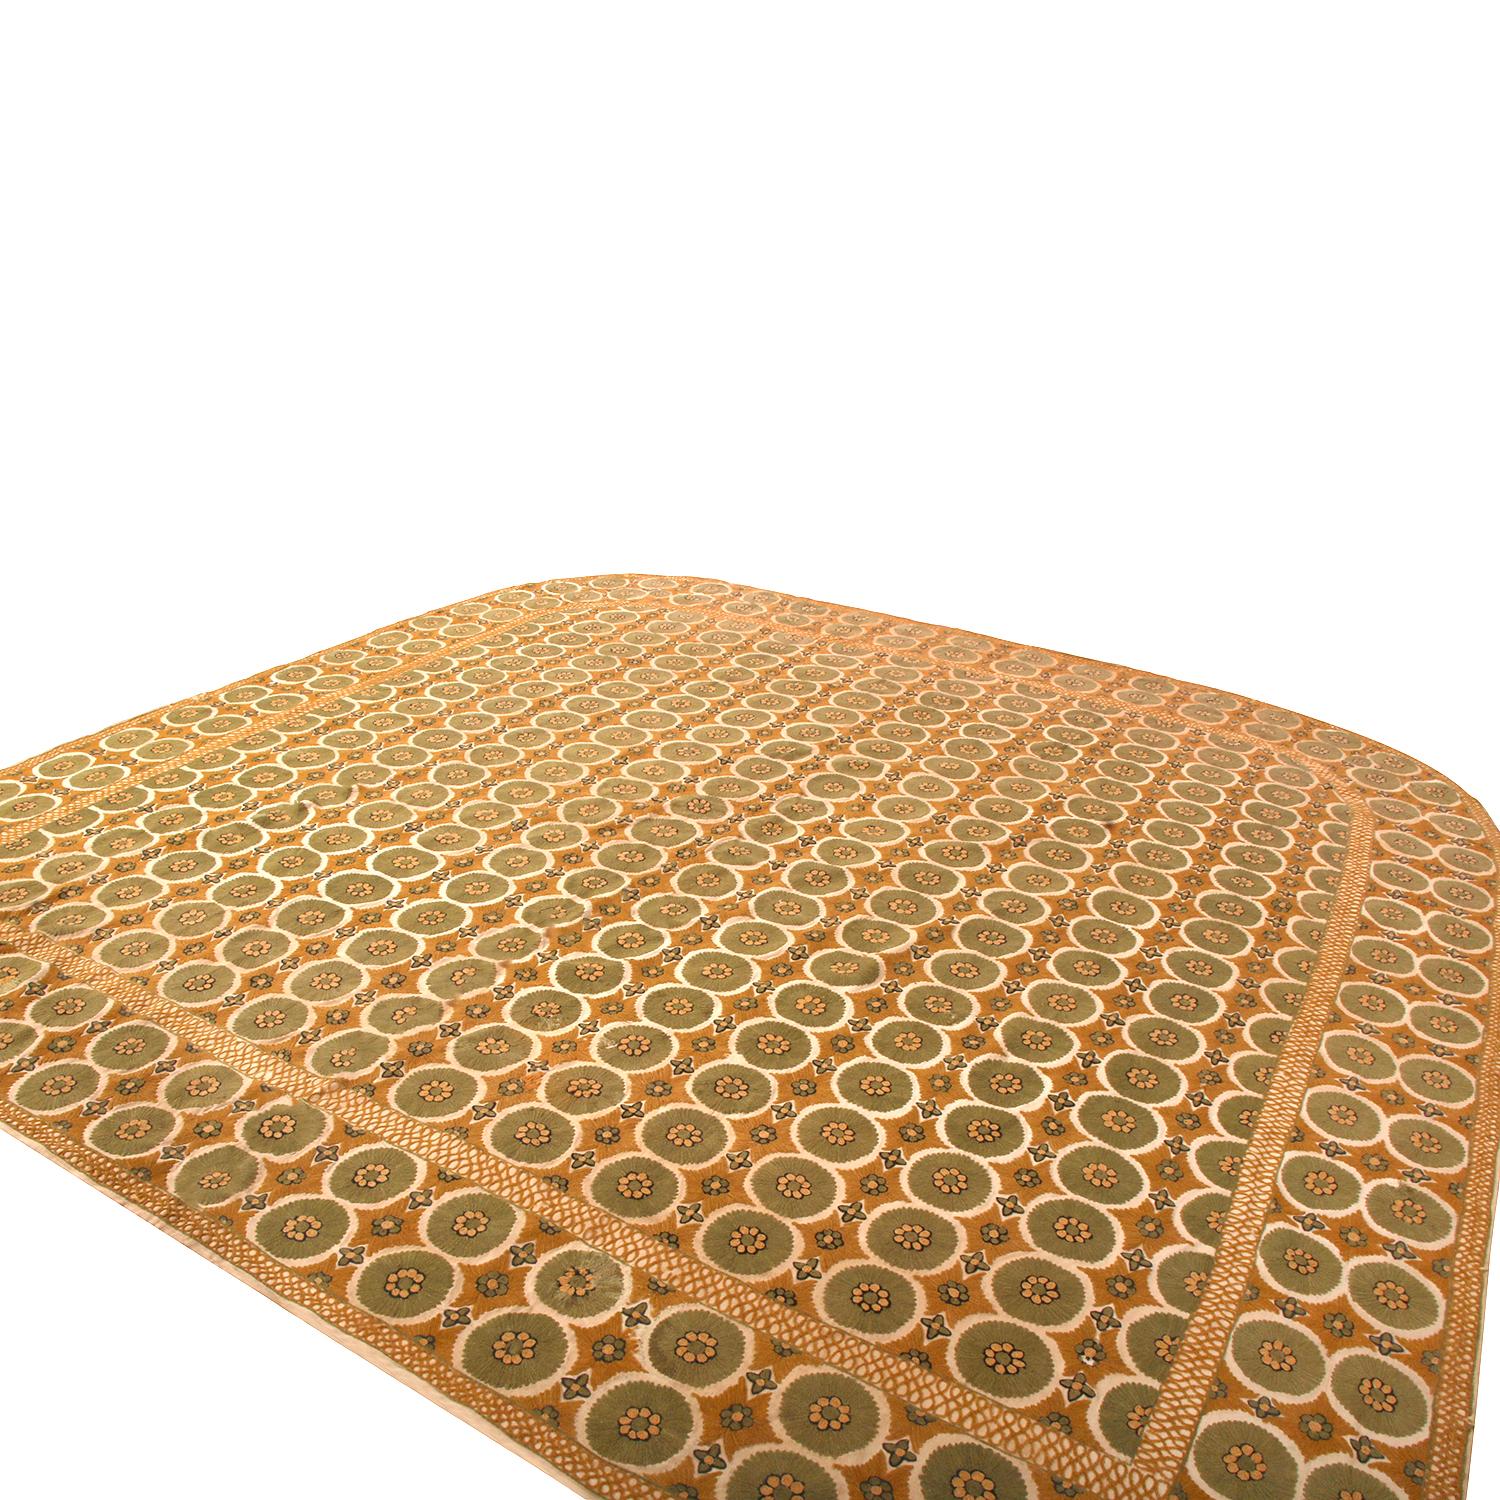 Handstitched in wool originating from Spain between 1970-1980, this vintage needle point rug enjoys a unique curvature for discerning projects, particularly suitable for rounded corner rooms and bedroom flooring projects. The play of the textural